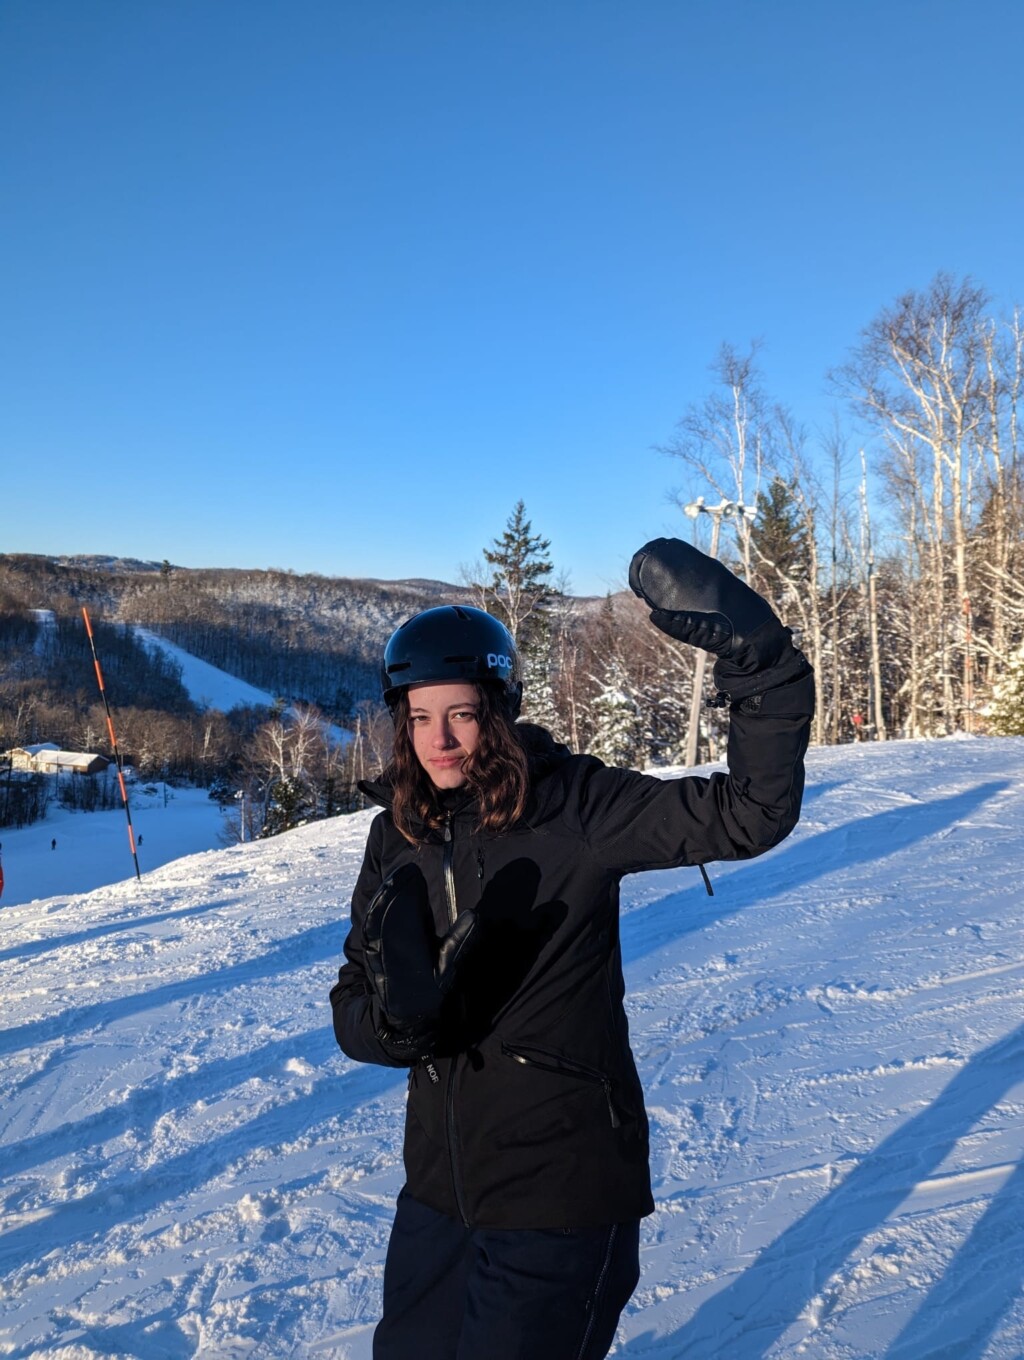 bilingual person waving on a ski trail during a clear blue sky winter day